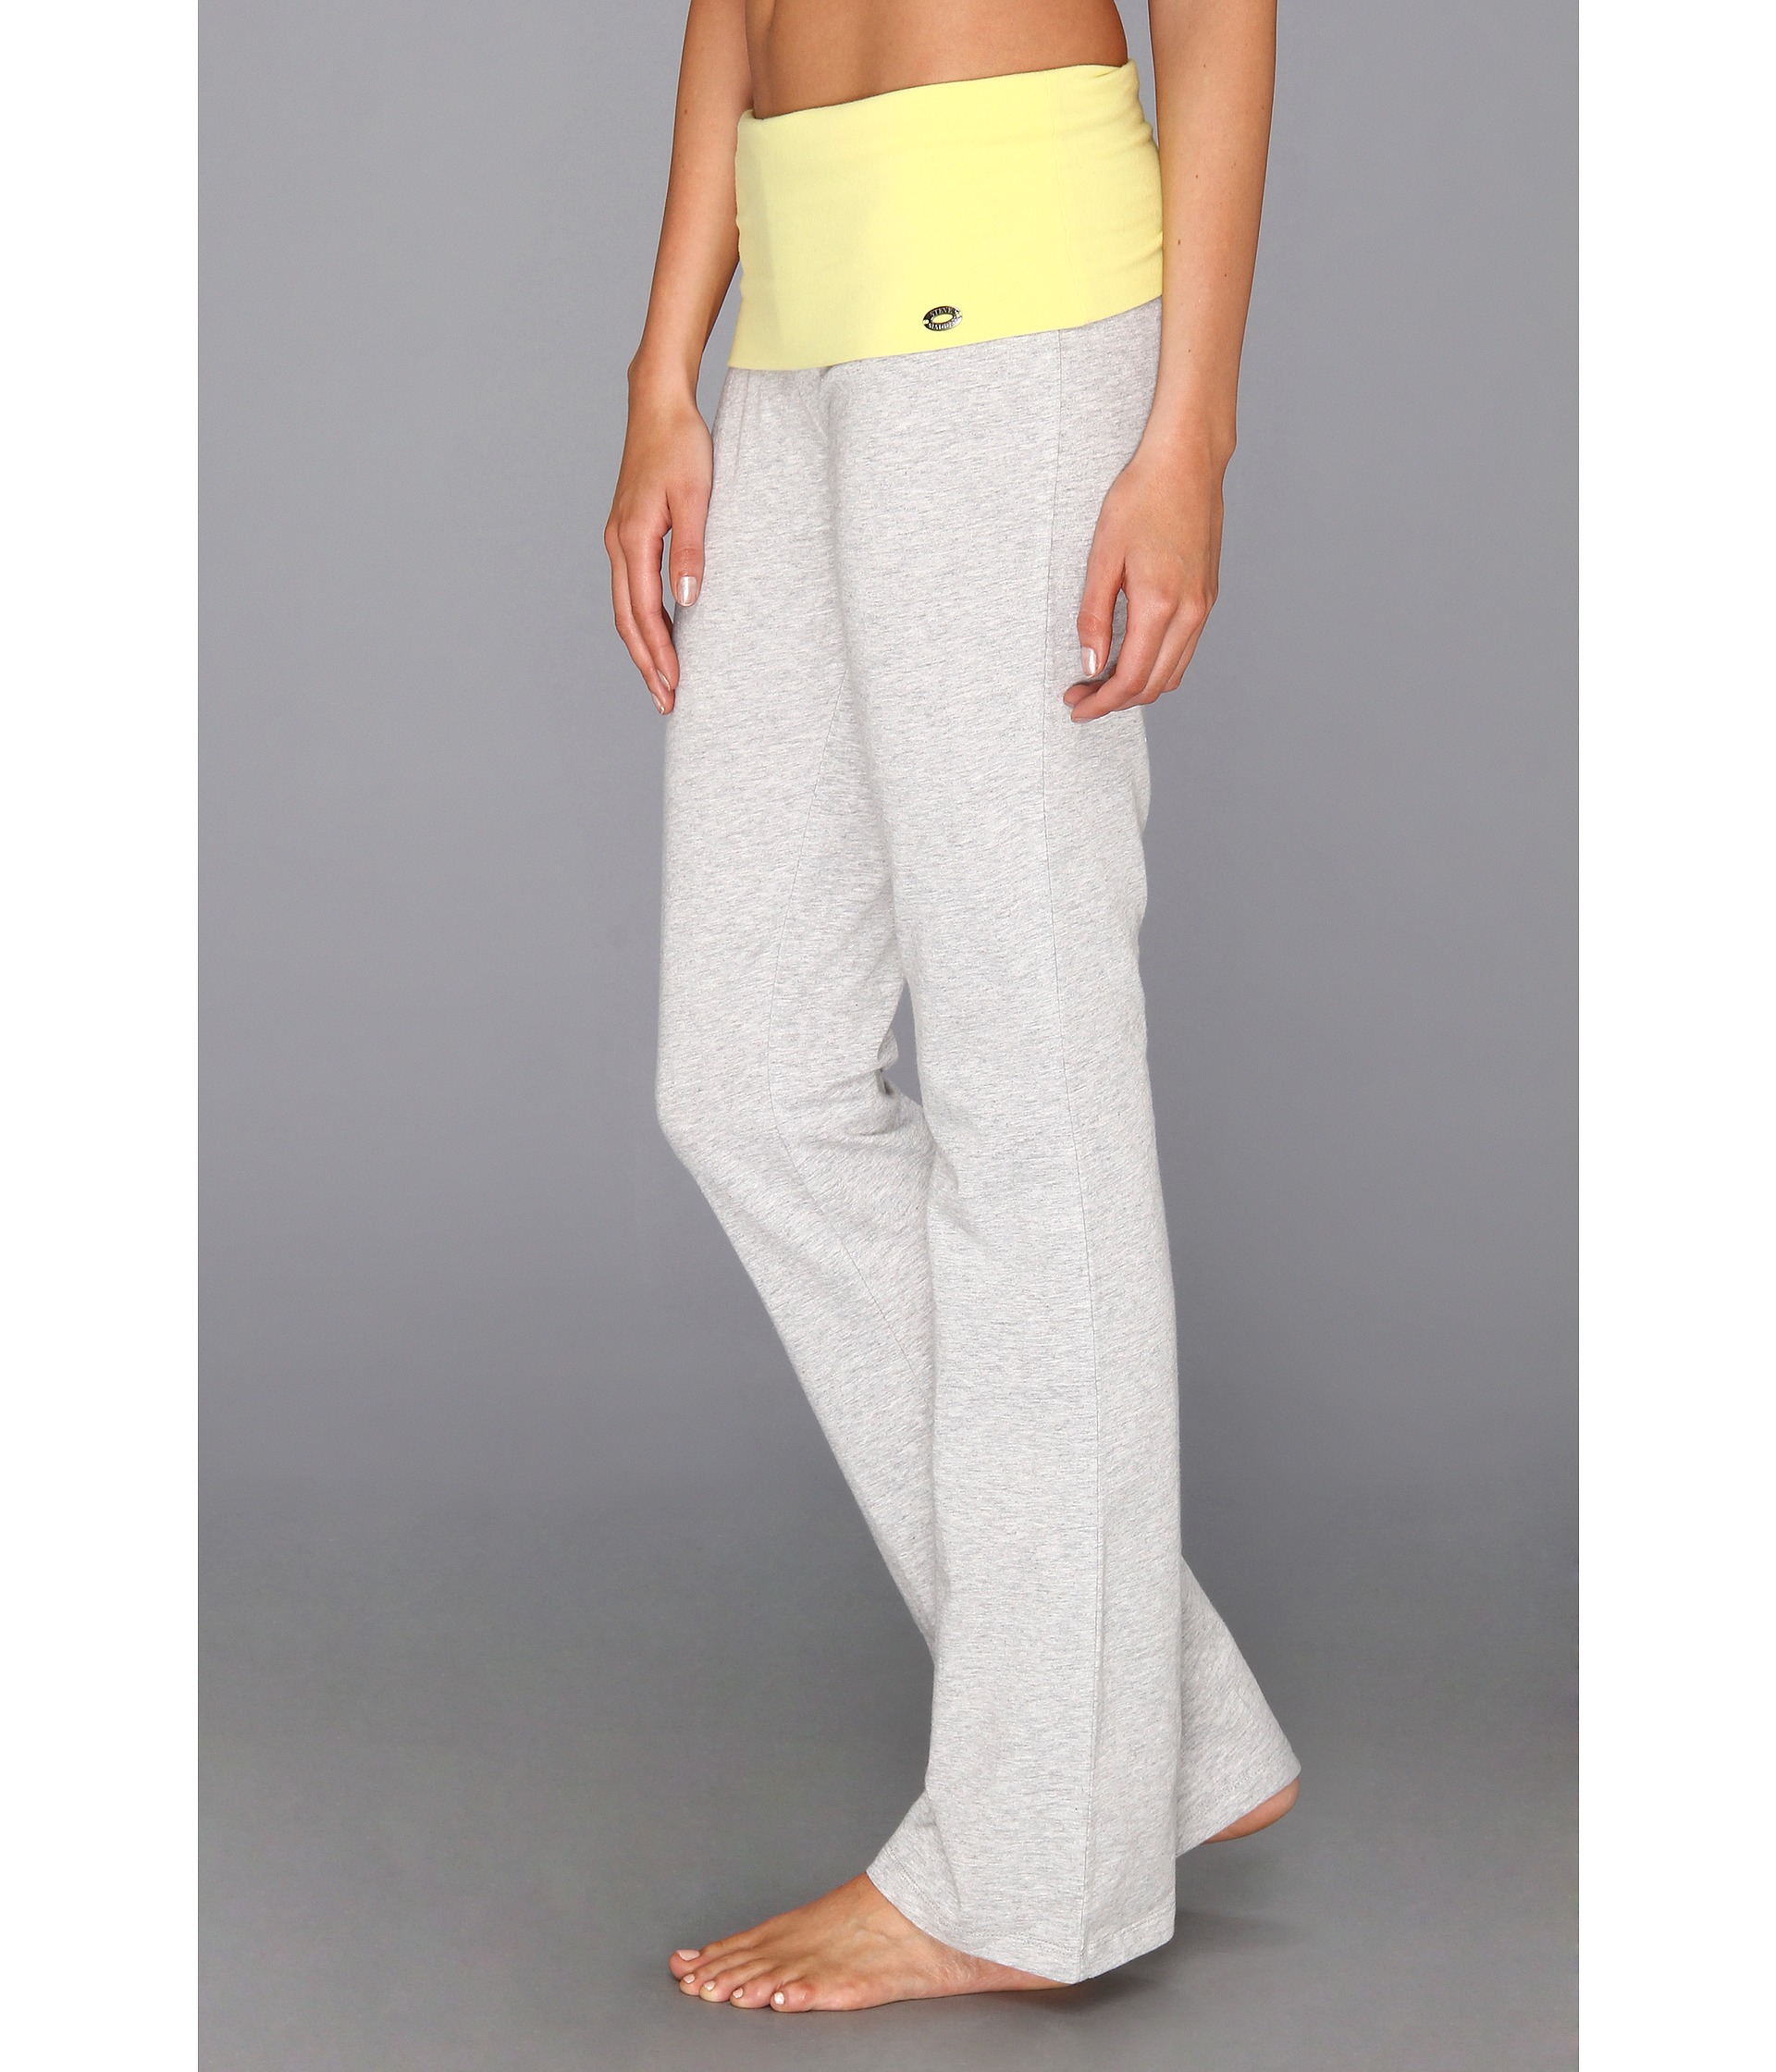 Steve Madden Work It Out Fold Over Yoga Pant | Shipped Free at Zappos